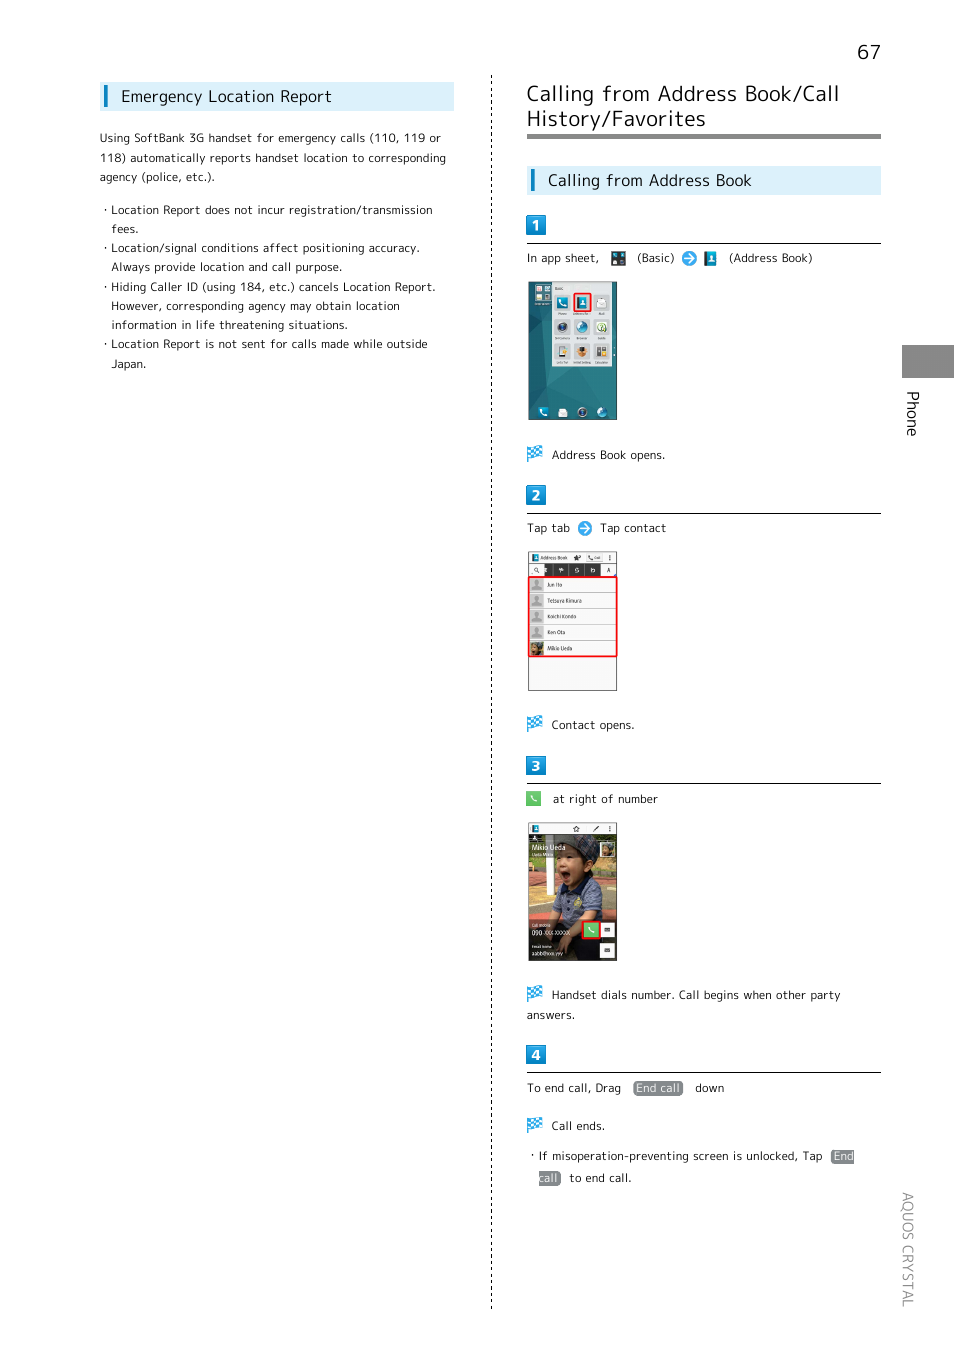 Calling from address book/call history/favorites, Phone, Emergency location report | Calling from address book | Sharp AQUOS Crystal User Manual | Page 69 / 240